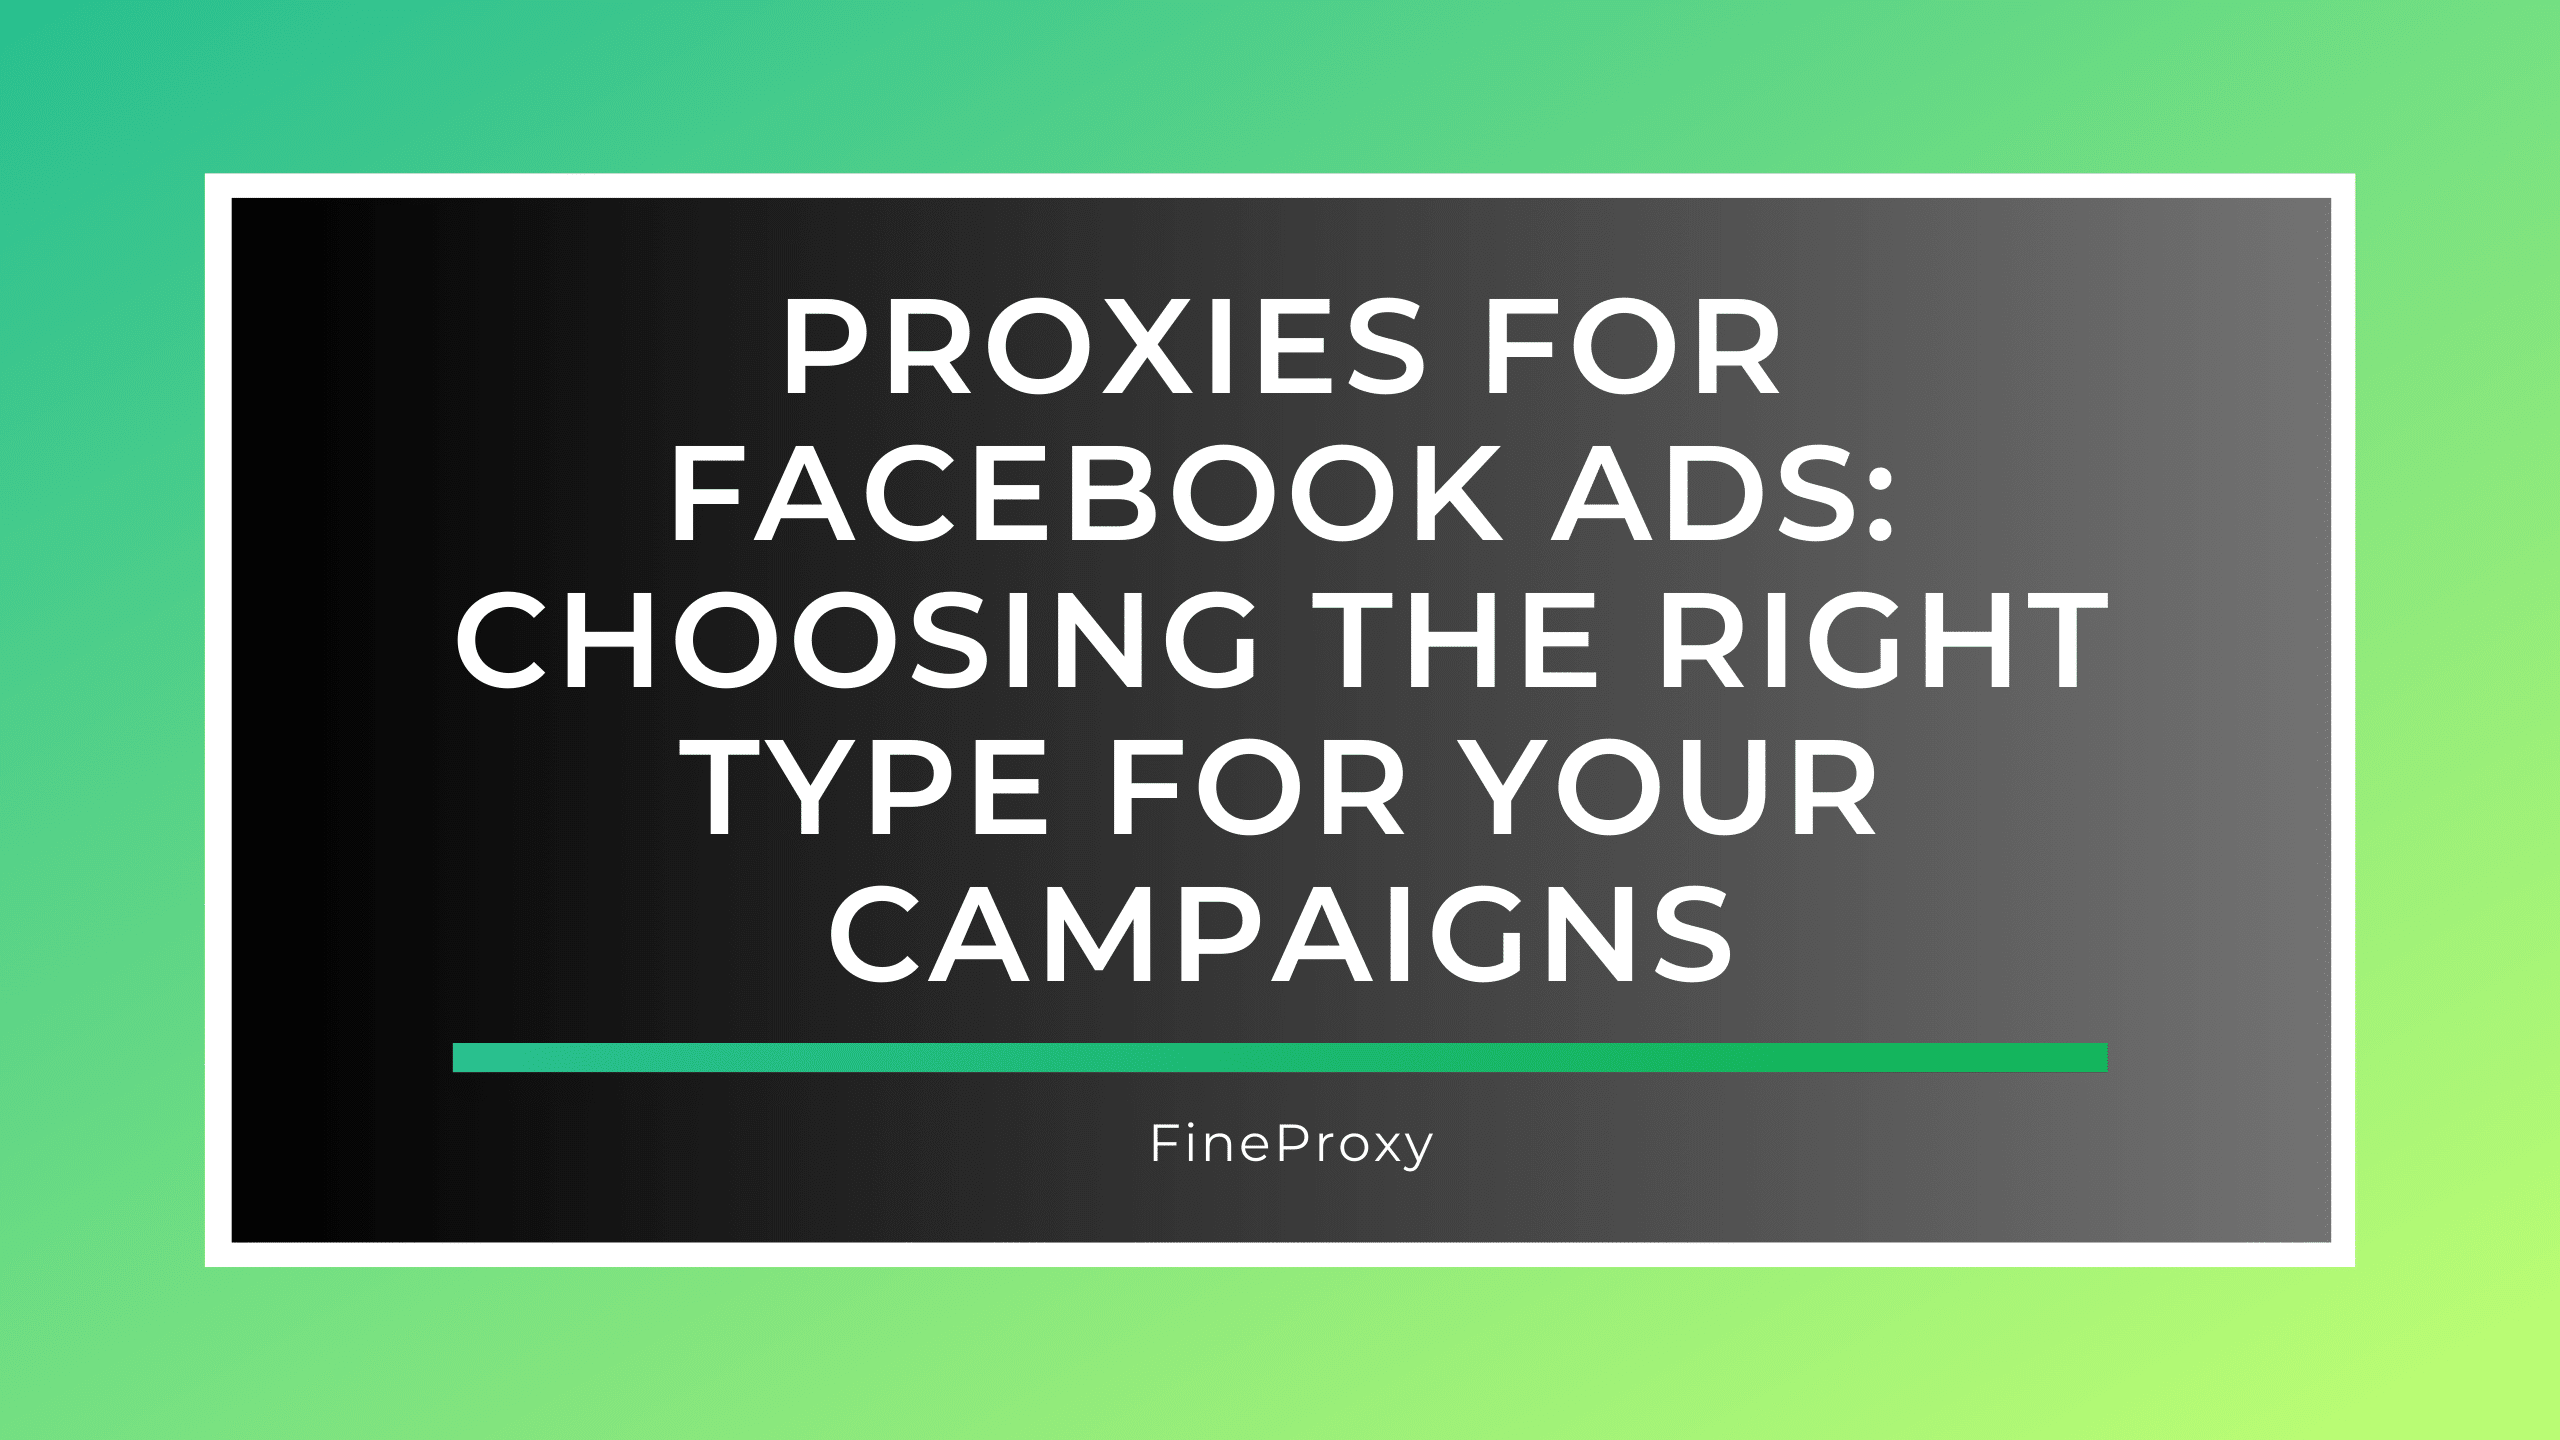 Proxies for Facebook Ads: Choosing the Right Type for Your Campaigns